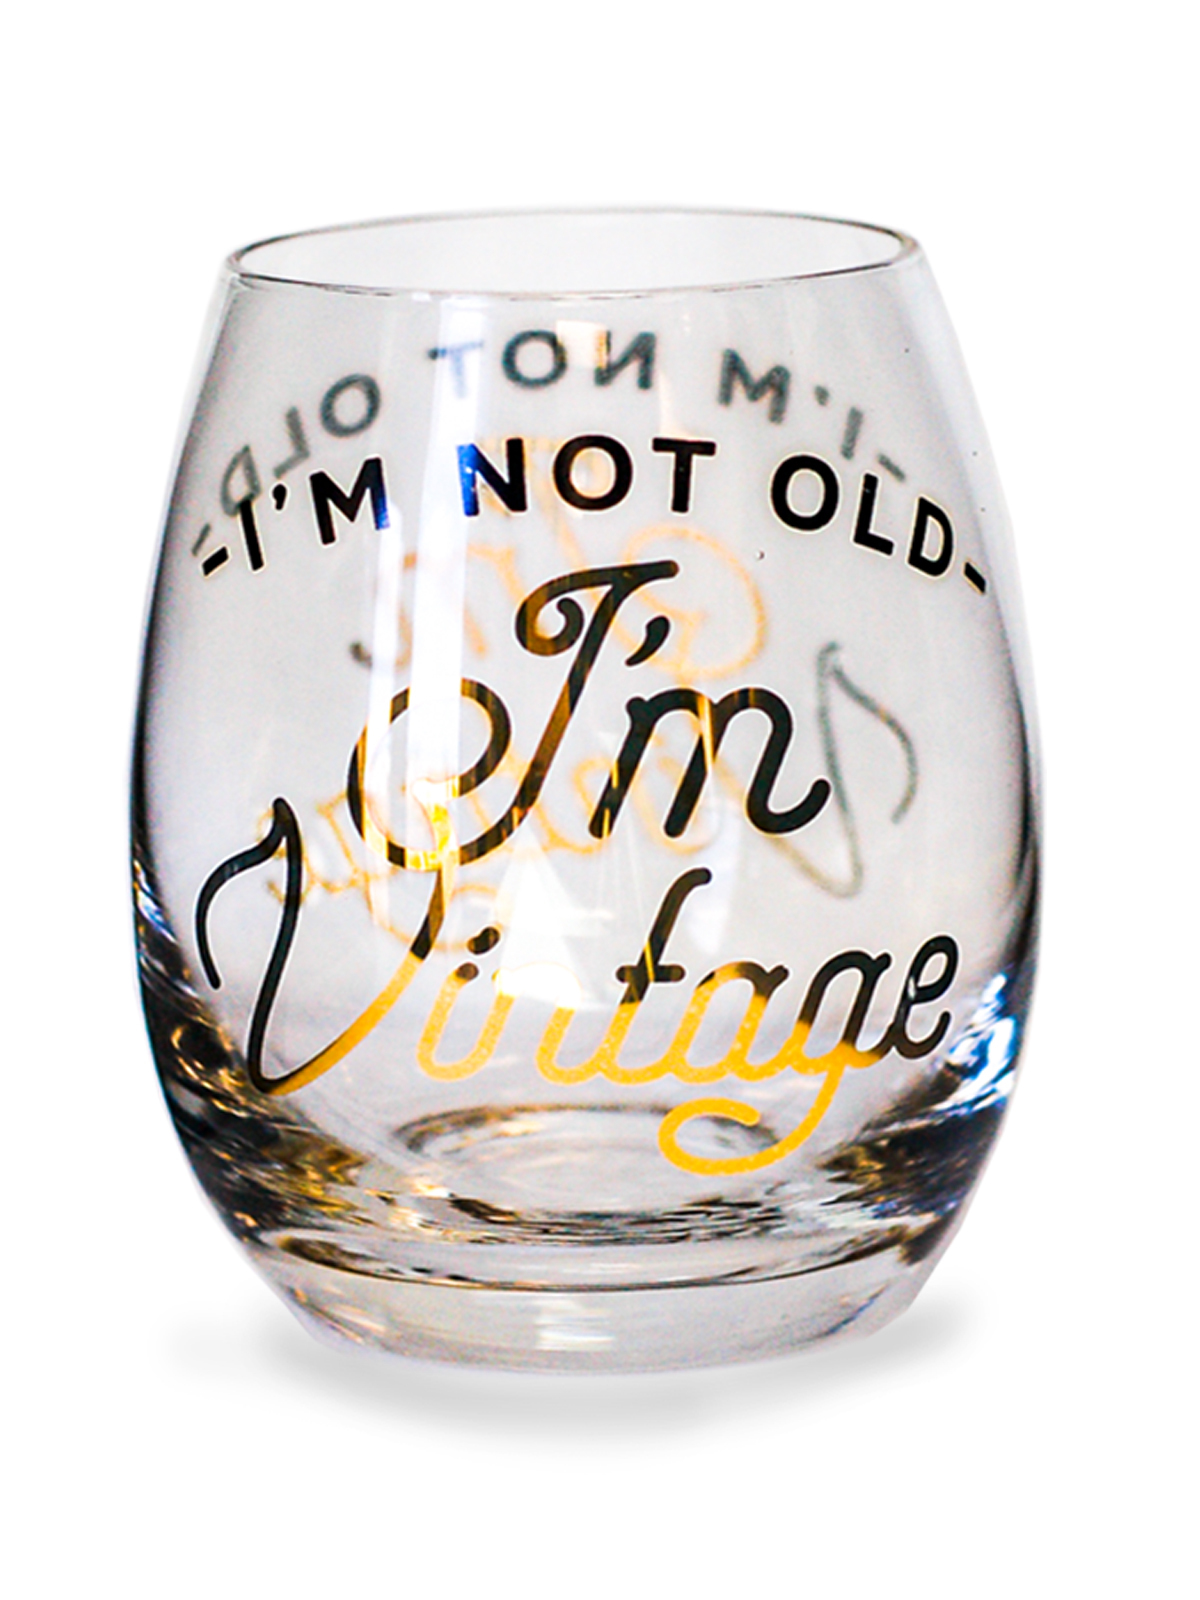 Fun Birthday Glassware Large 17 Oz Glasses Stemless Wine Glass Gift for Grandfathers & Dads Best Grandpa Ever 